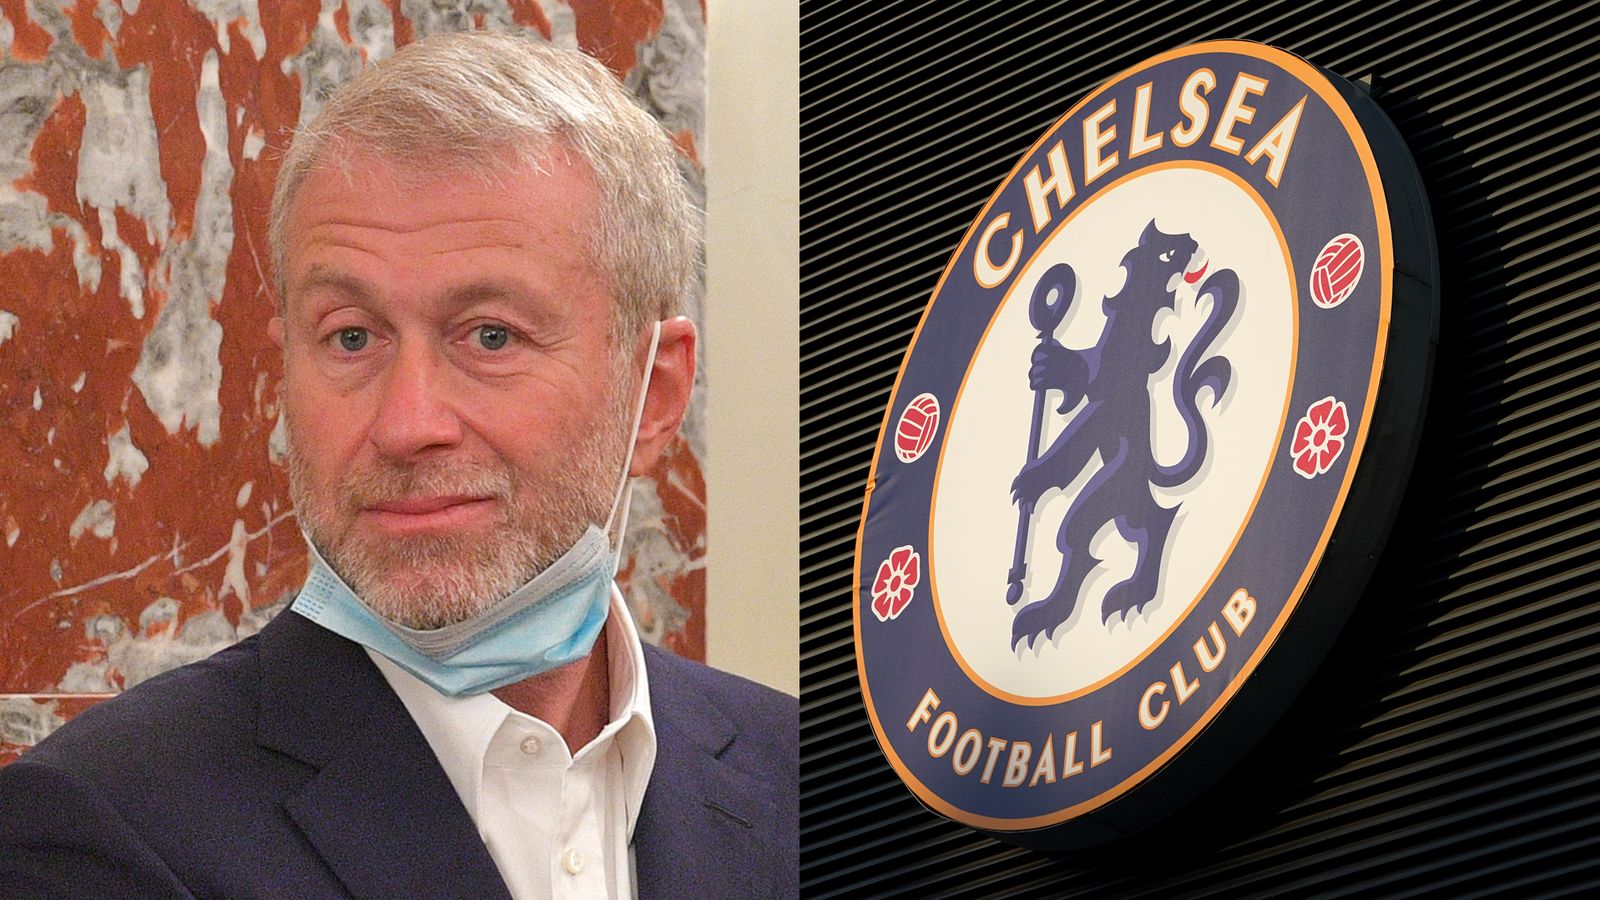 Jamie Carragher criticises Chelsea and Roman Abramovich statement: 'Really poor'..